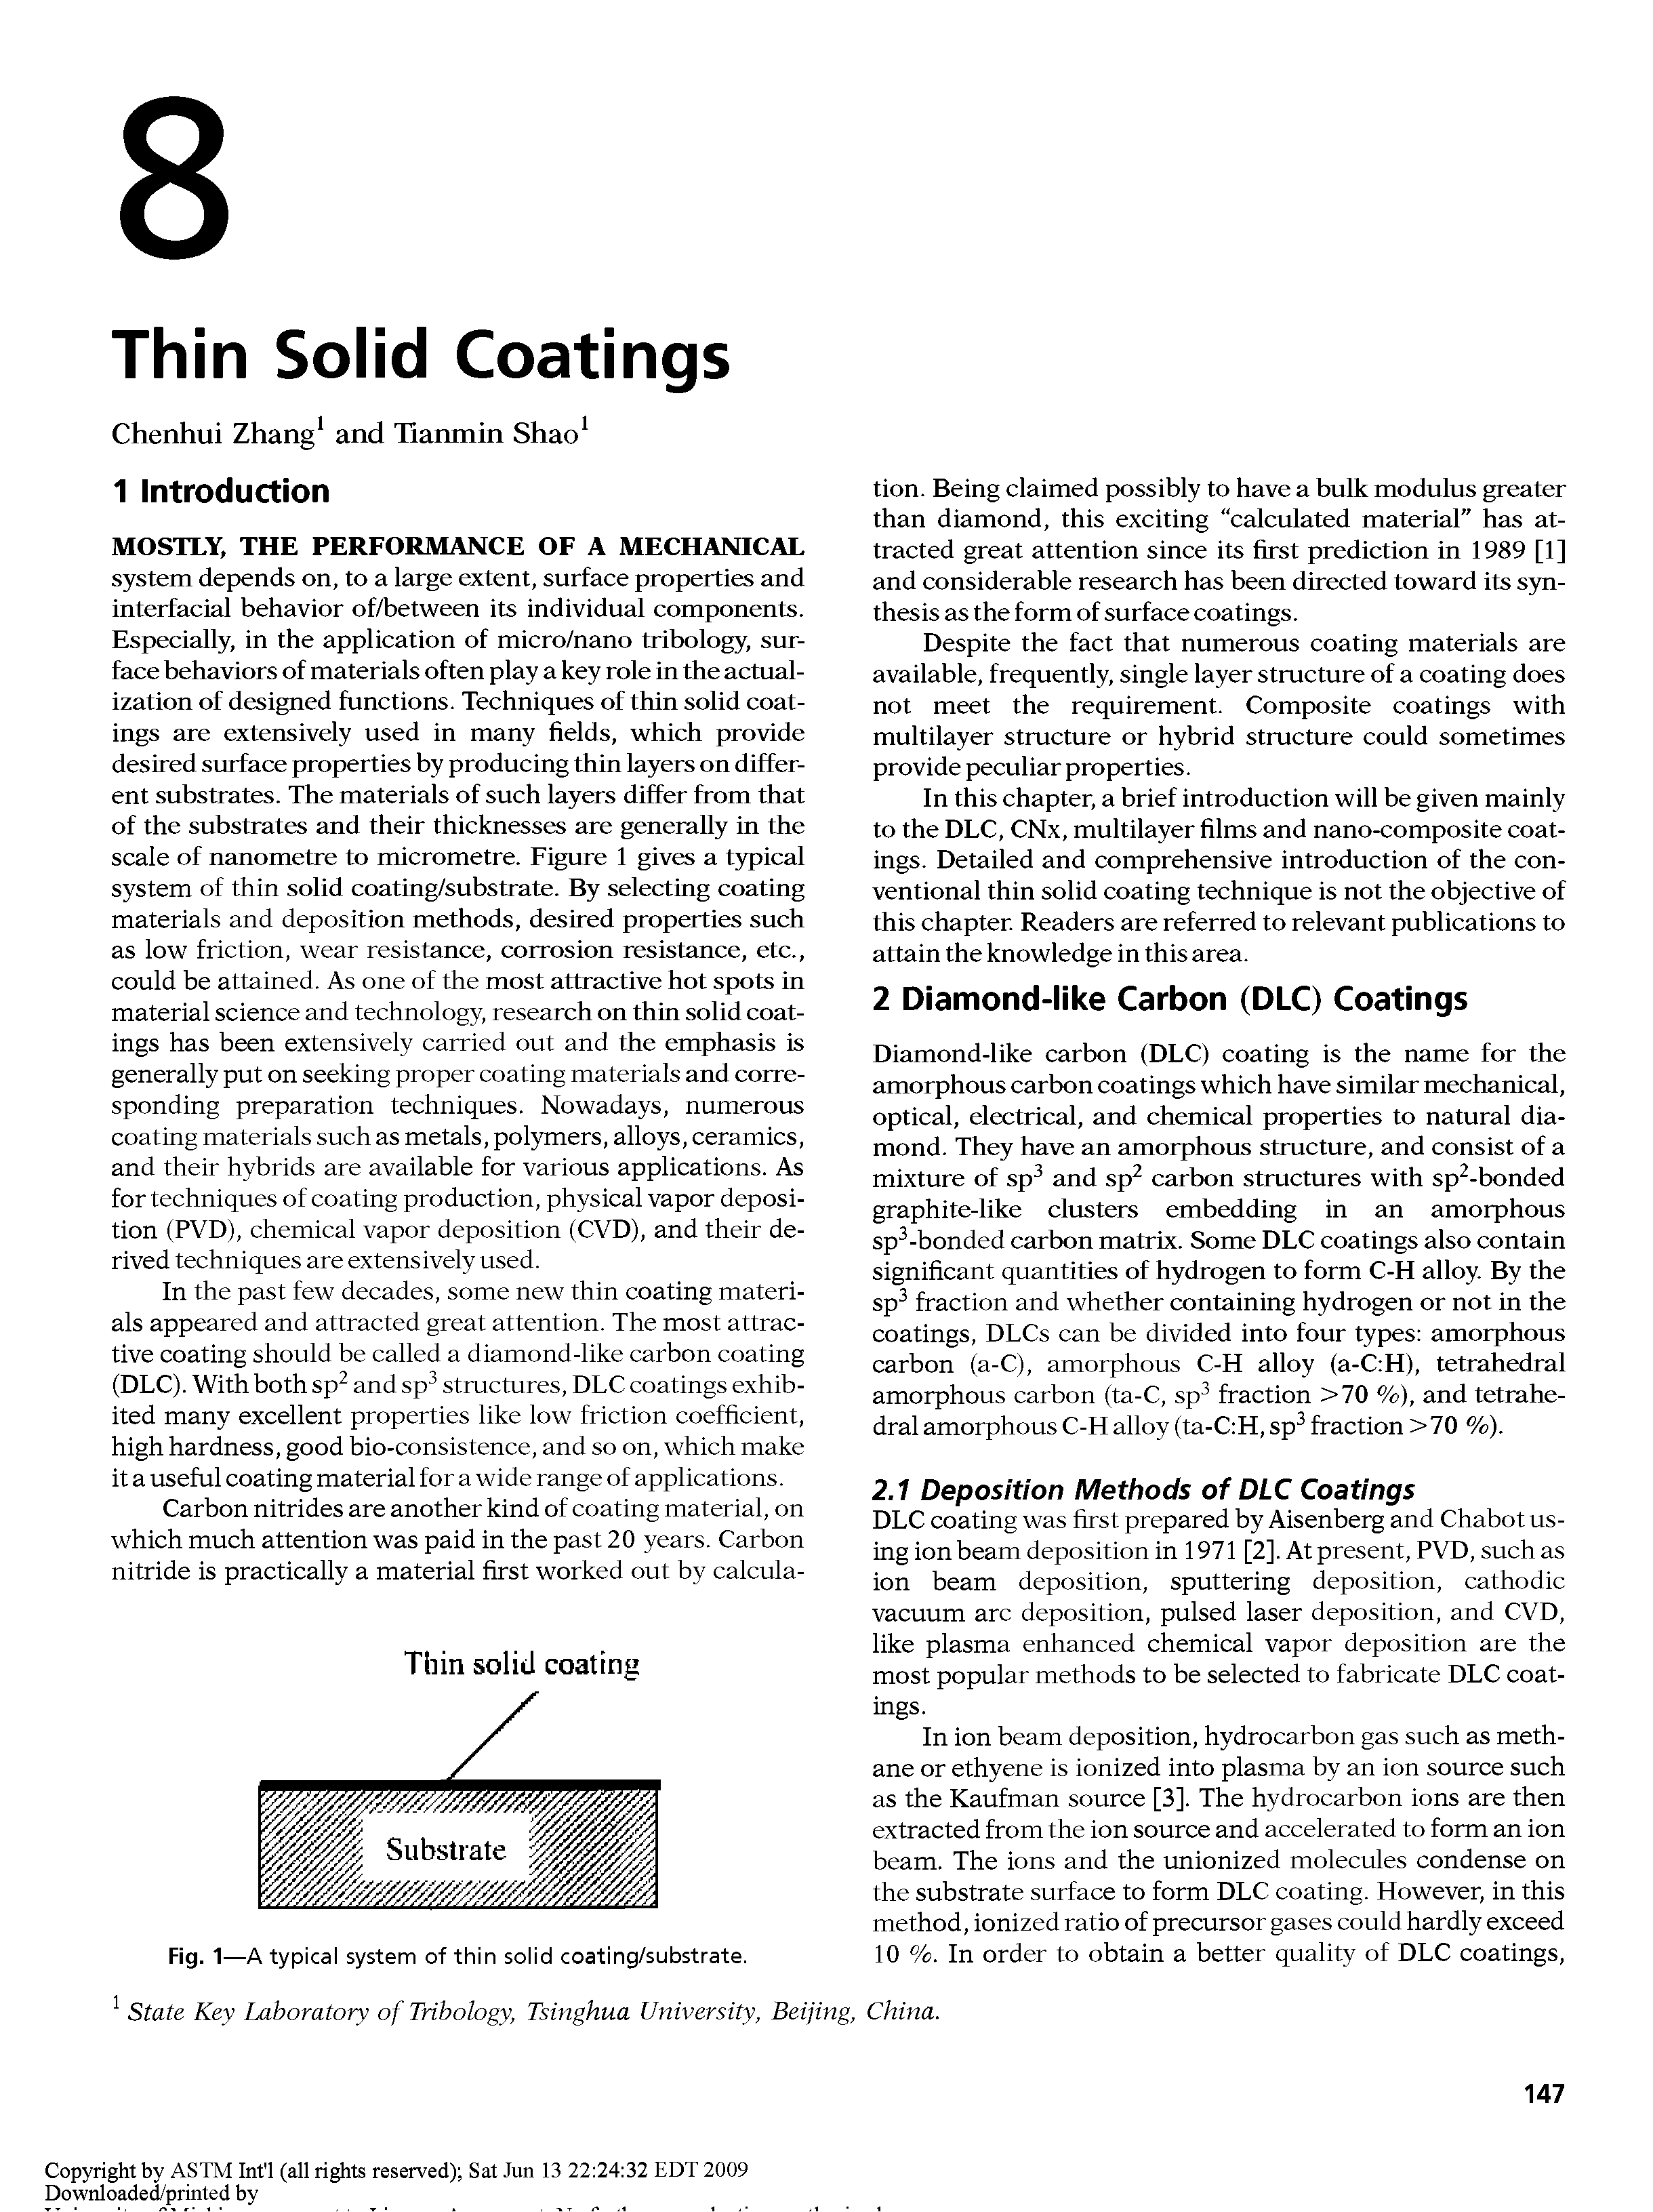 Fig. 1—A typical system of thin solid coating/substrate.